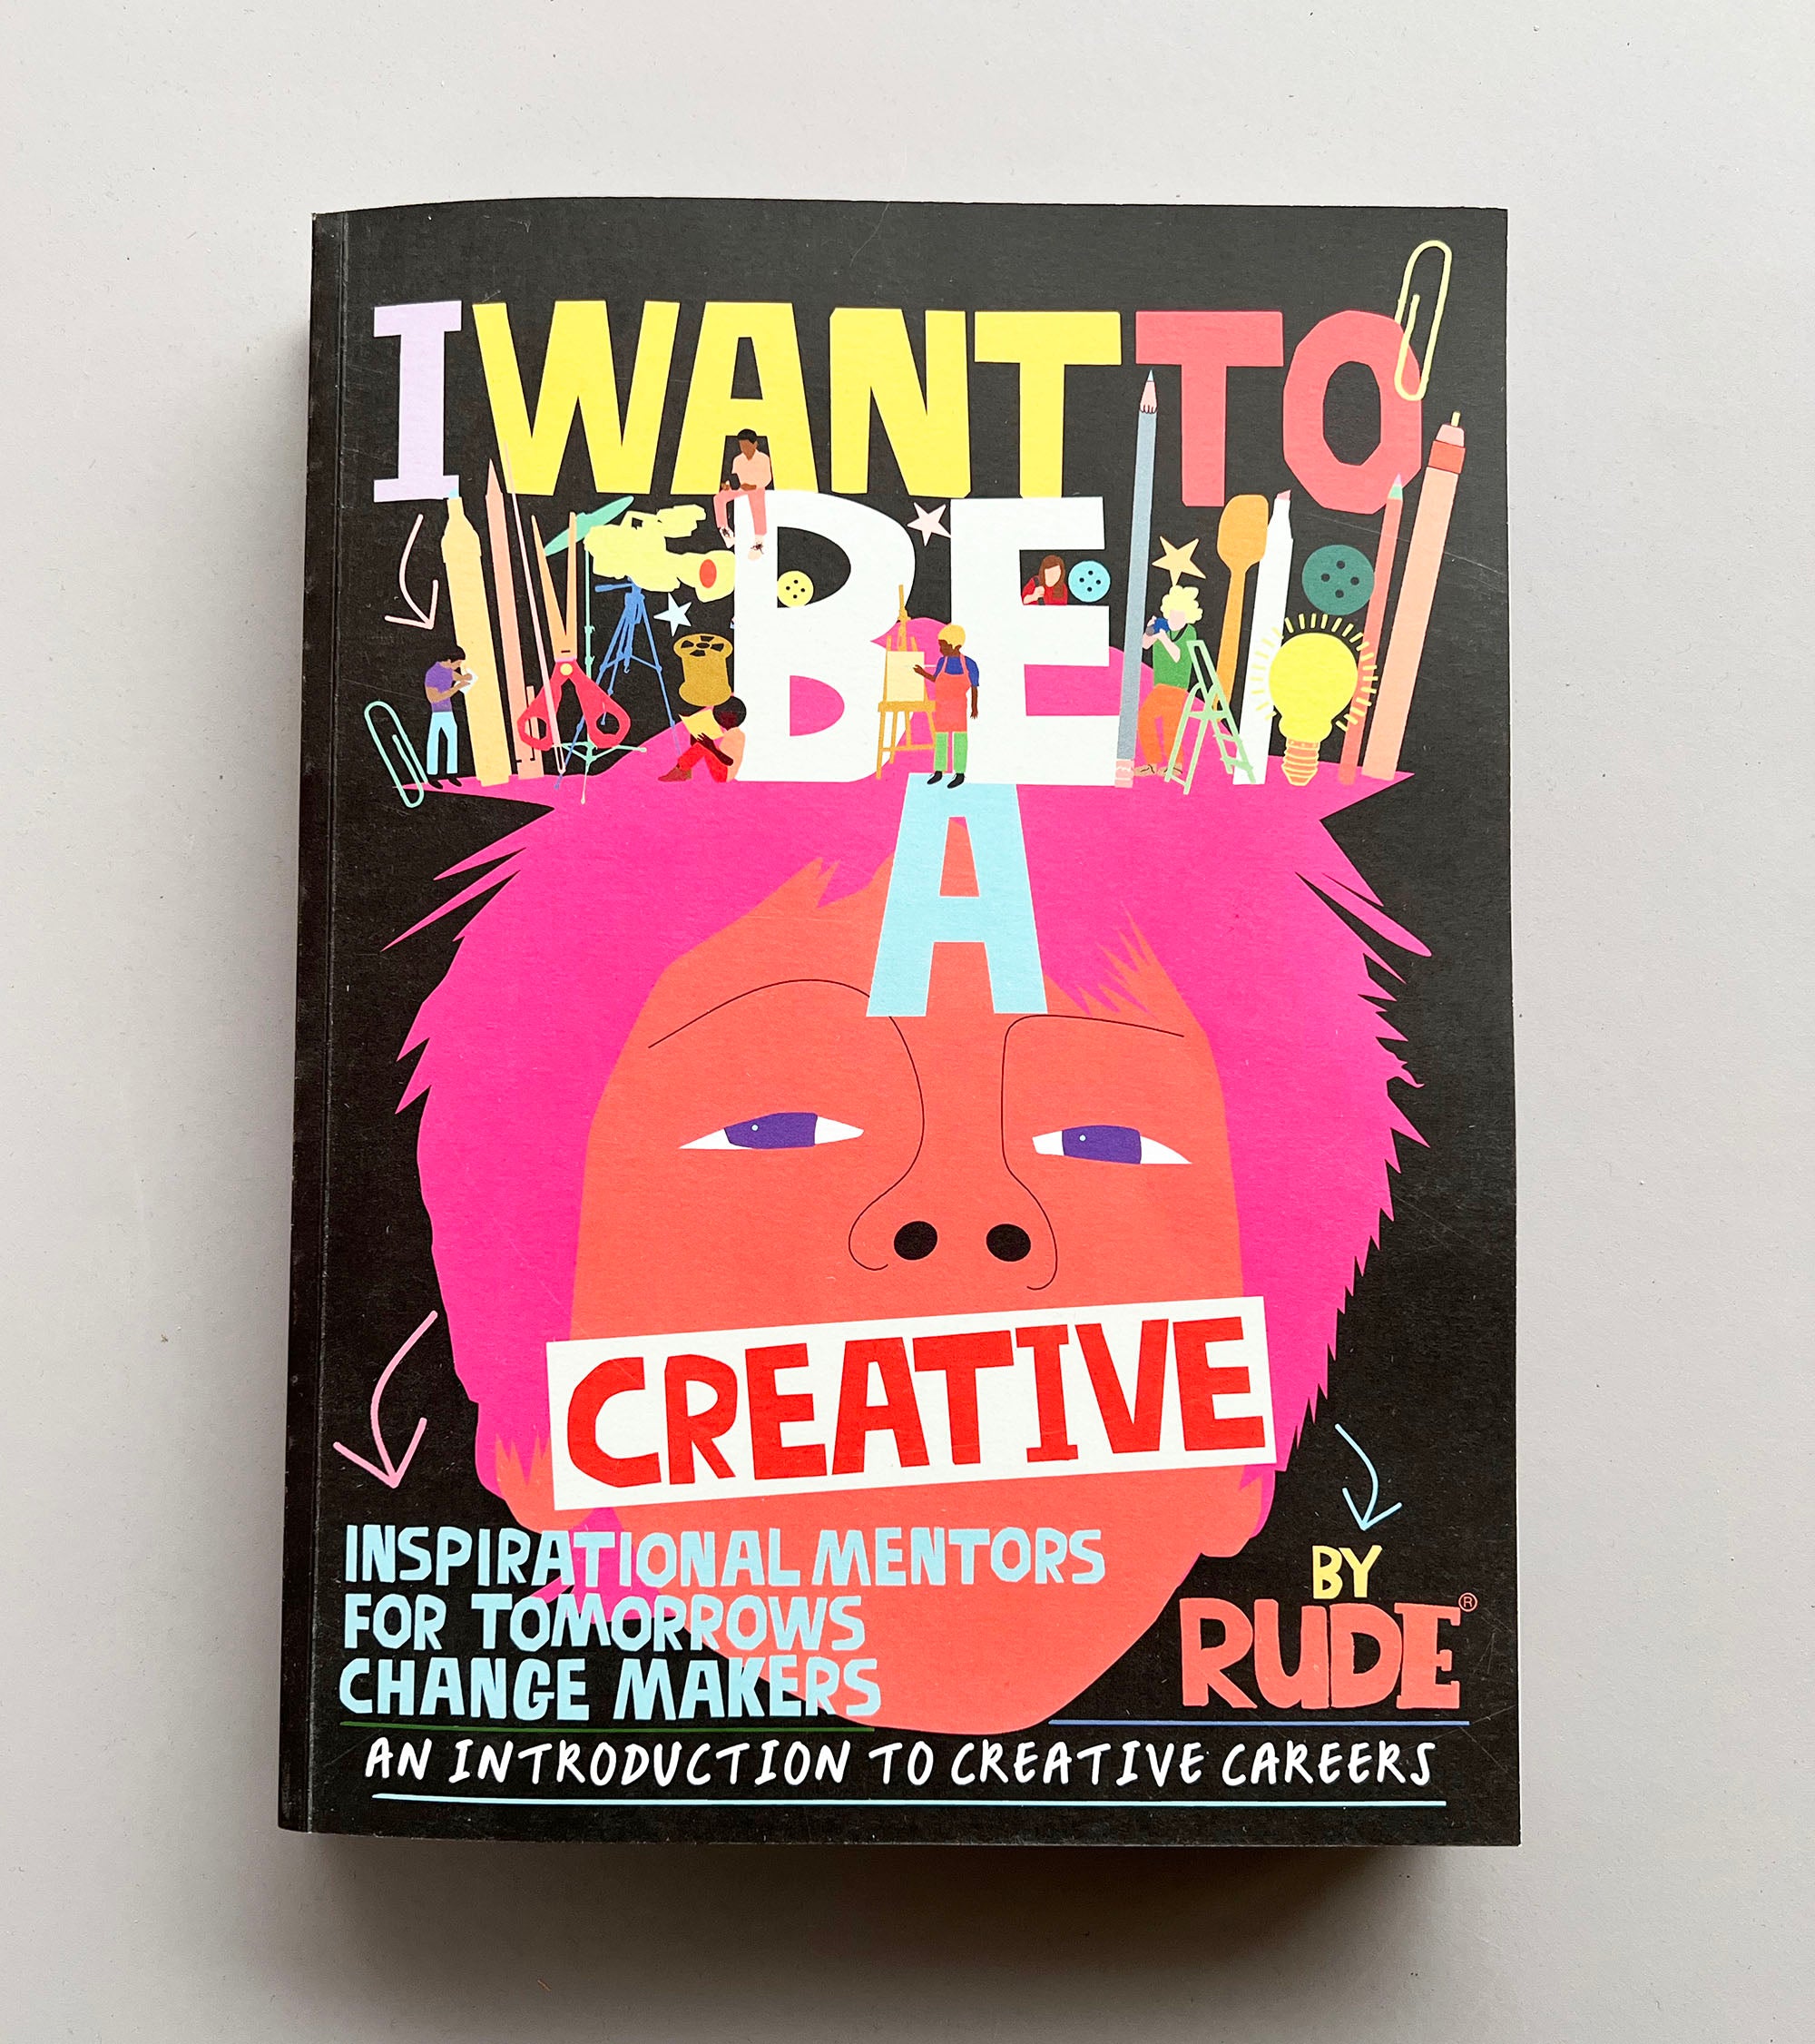 'I want to be a creative' Book